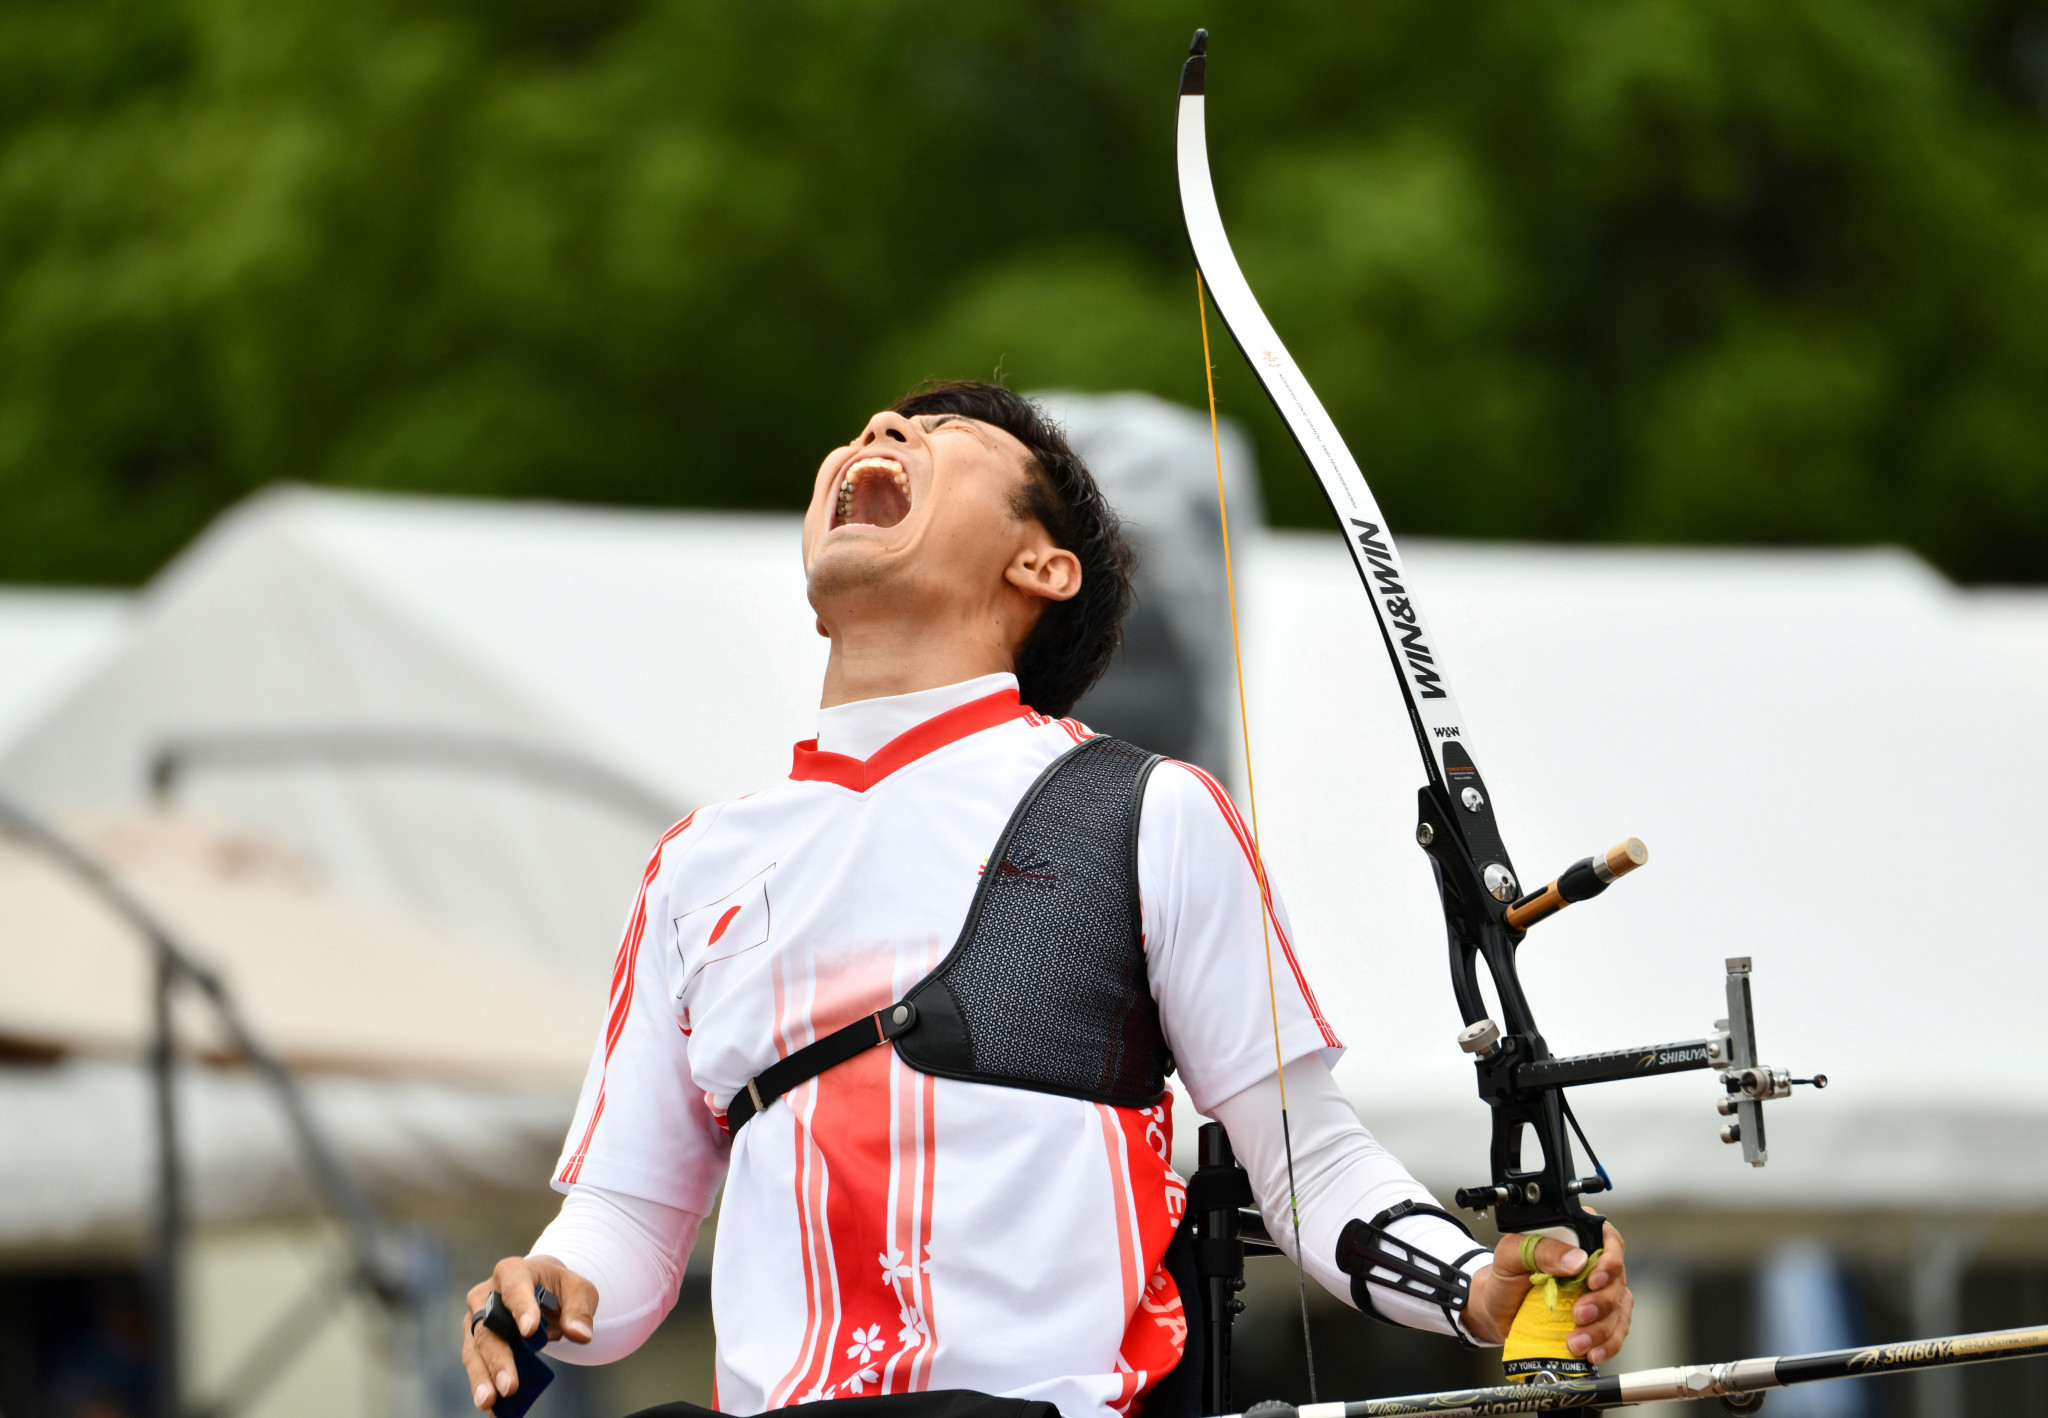 Ueyama wins shoot-off to take men's open recurve title at World Archery Para Championships 